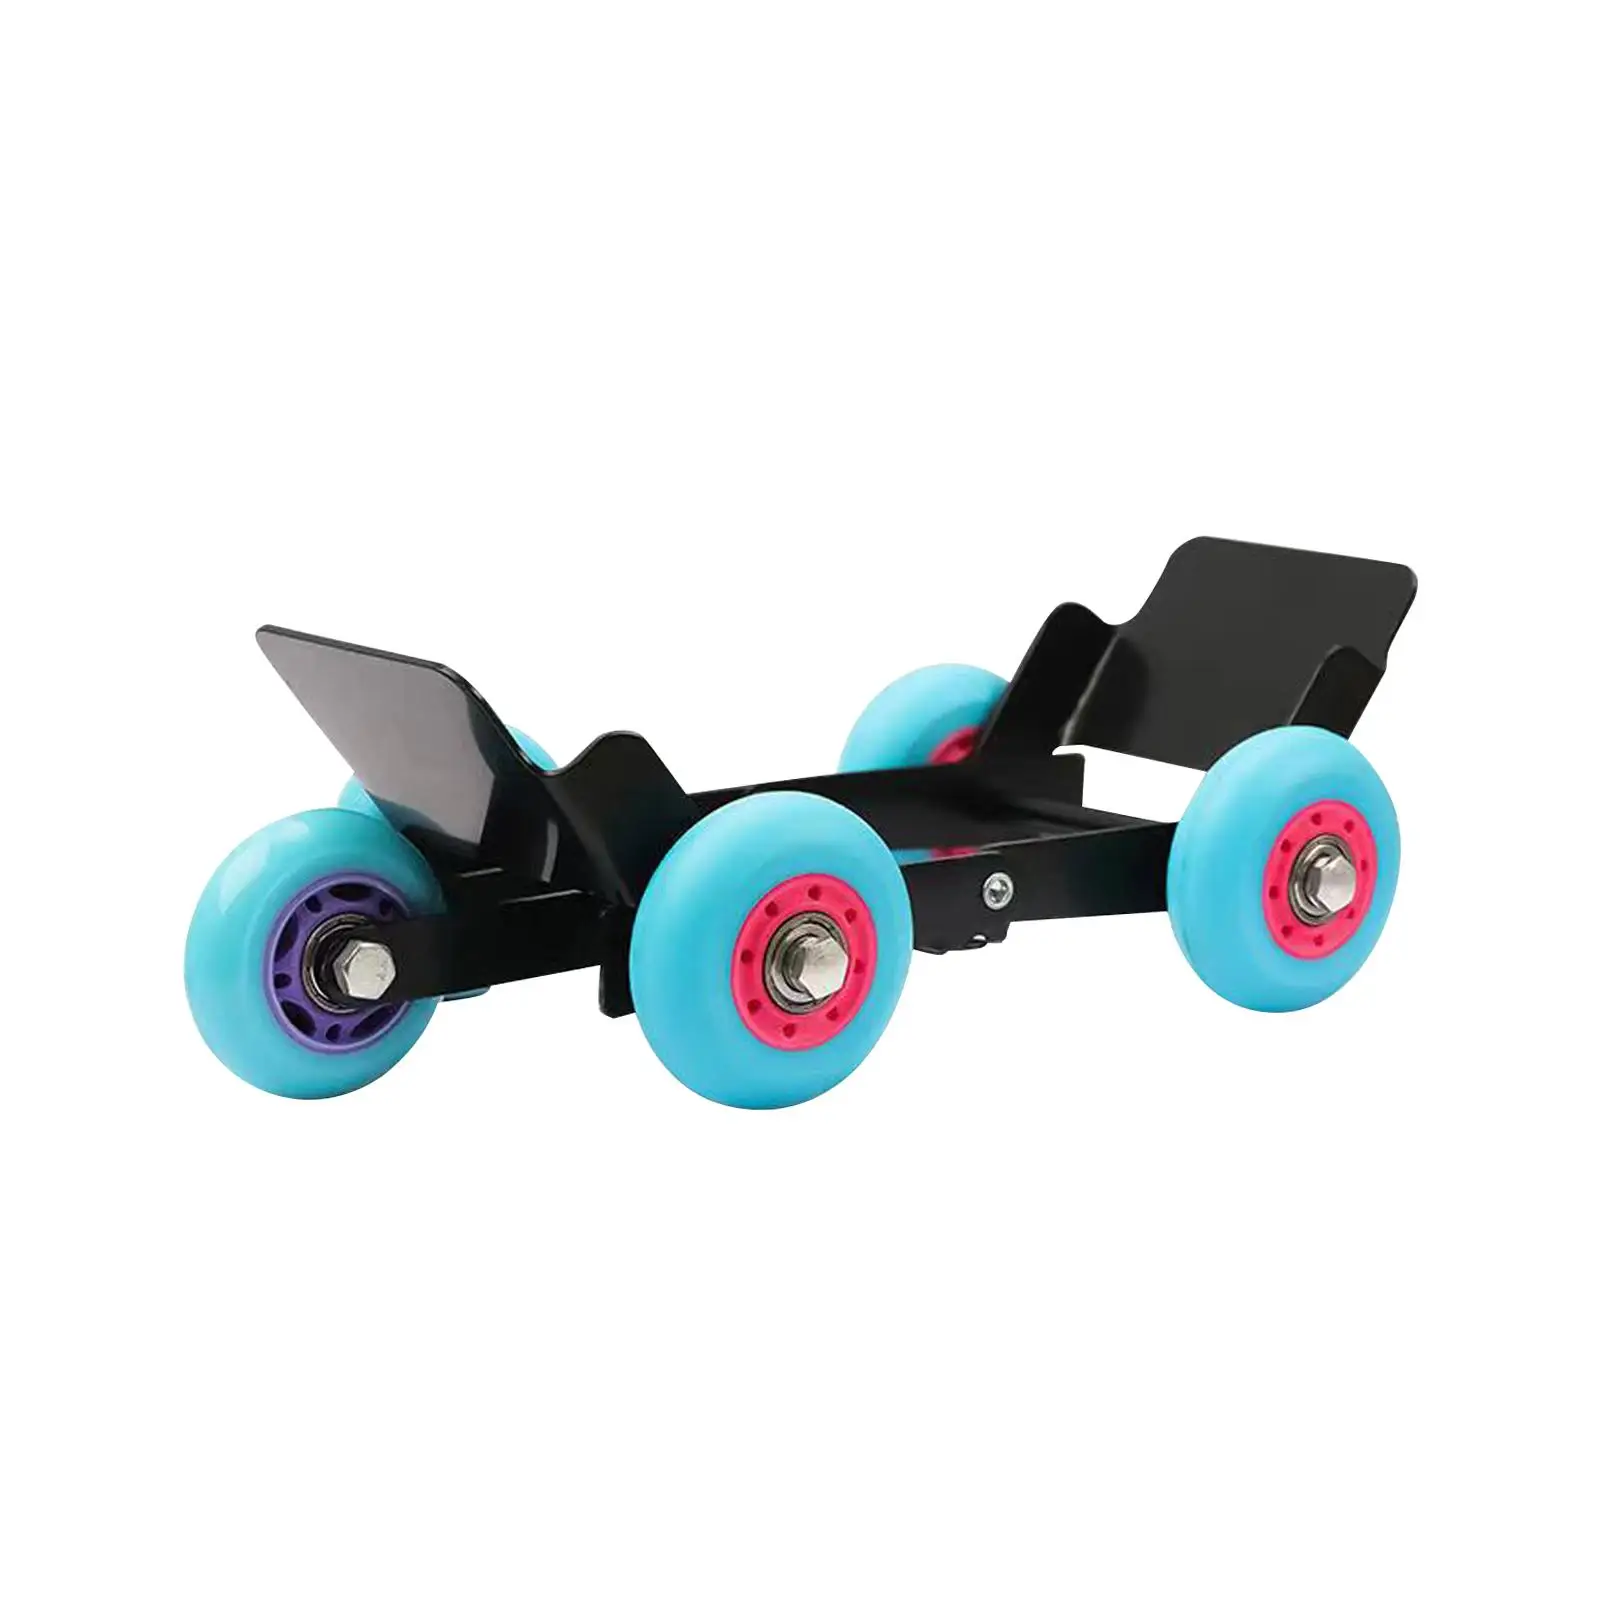 Universal Tricycle Motorcycle Emergency Tire Roller Versatile with 5 Wheels